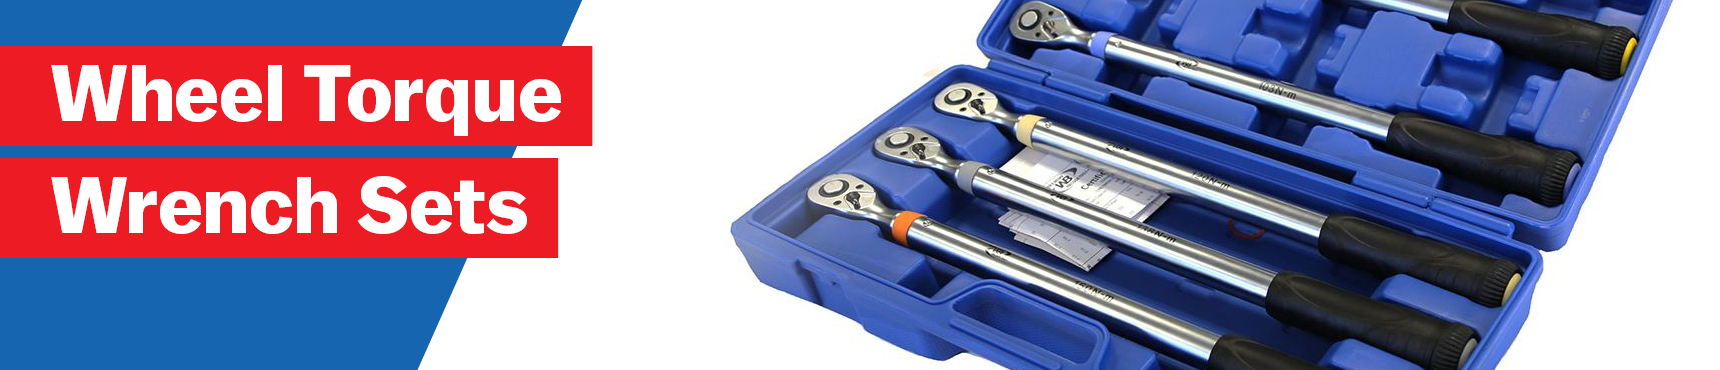 Wheel Torque Wrench Sets